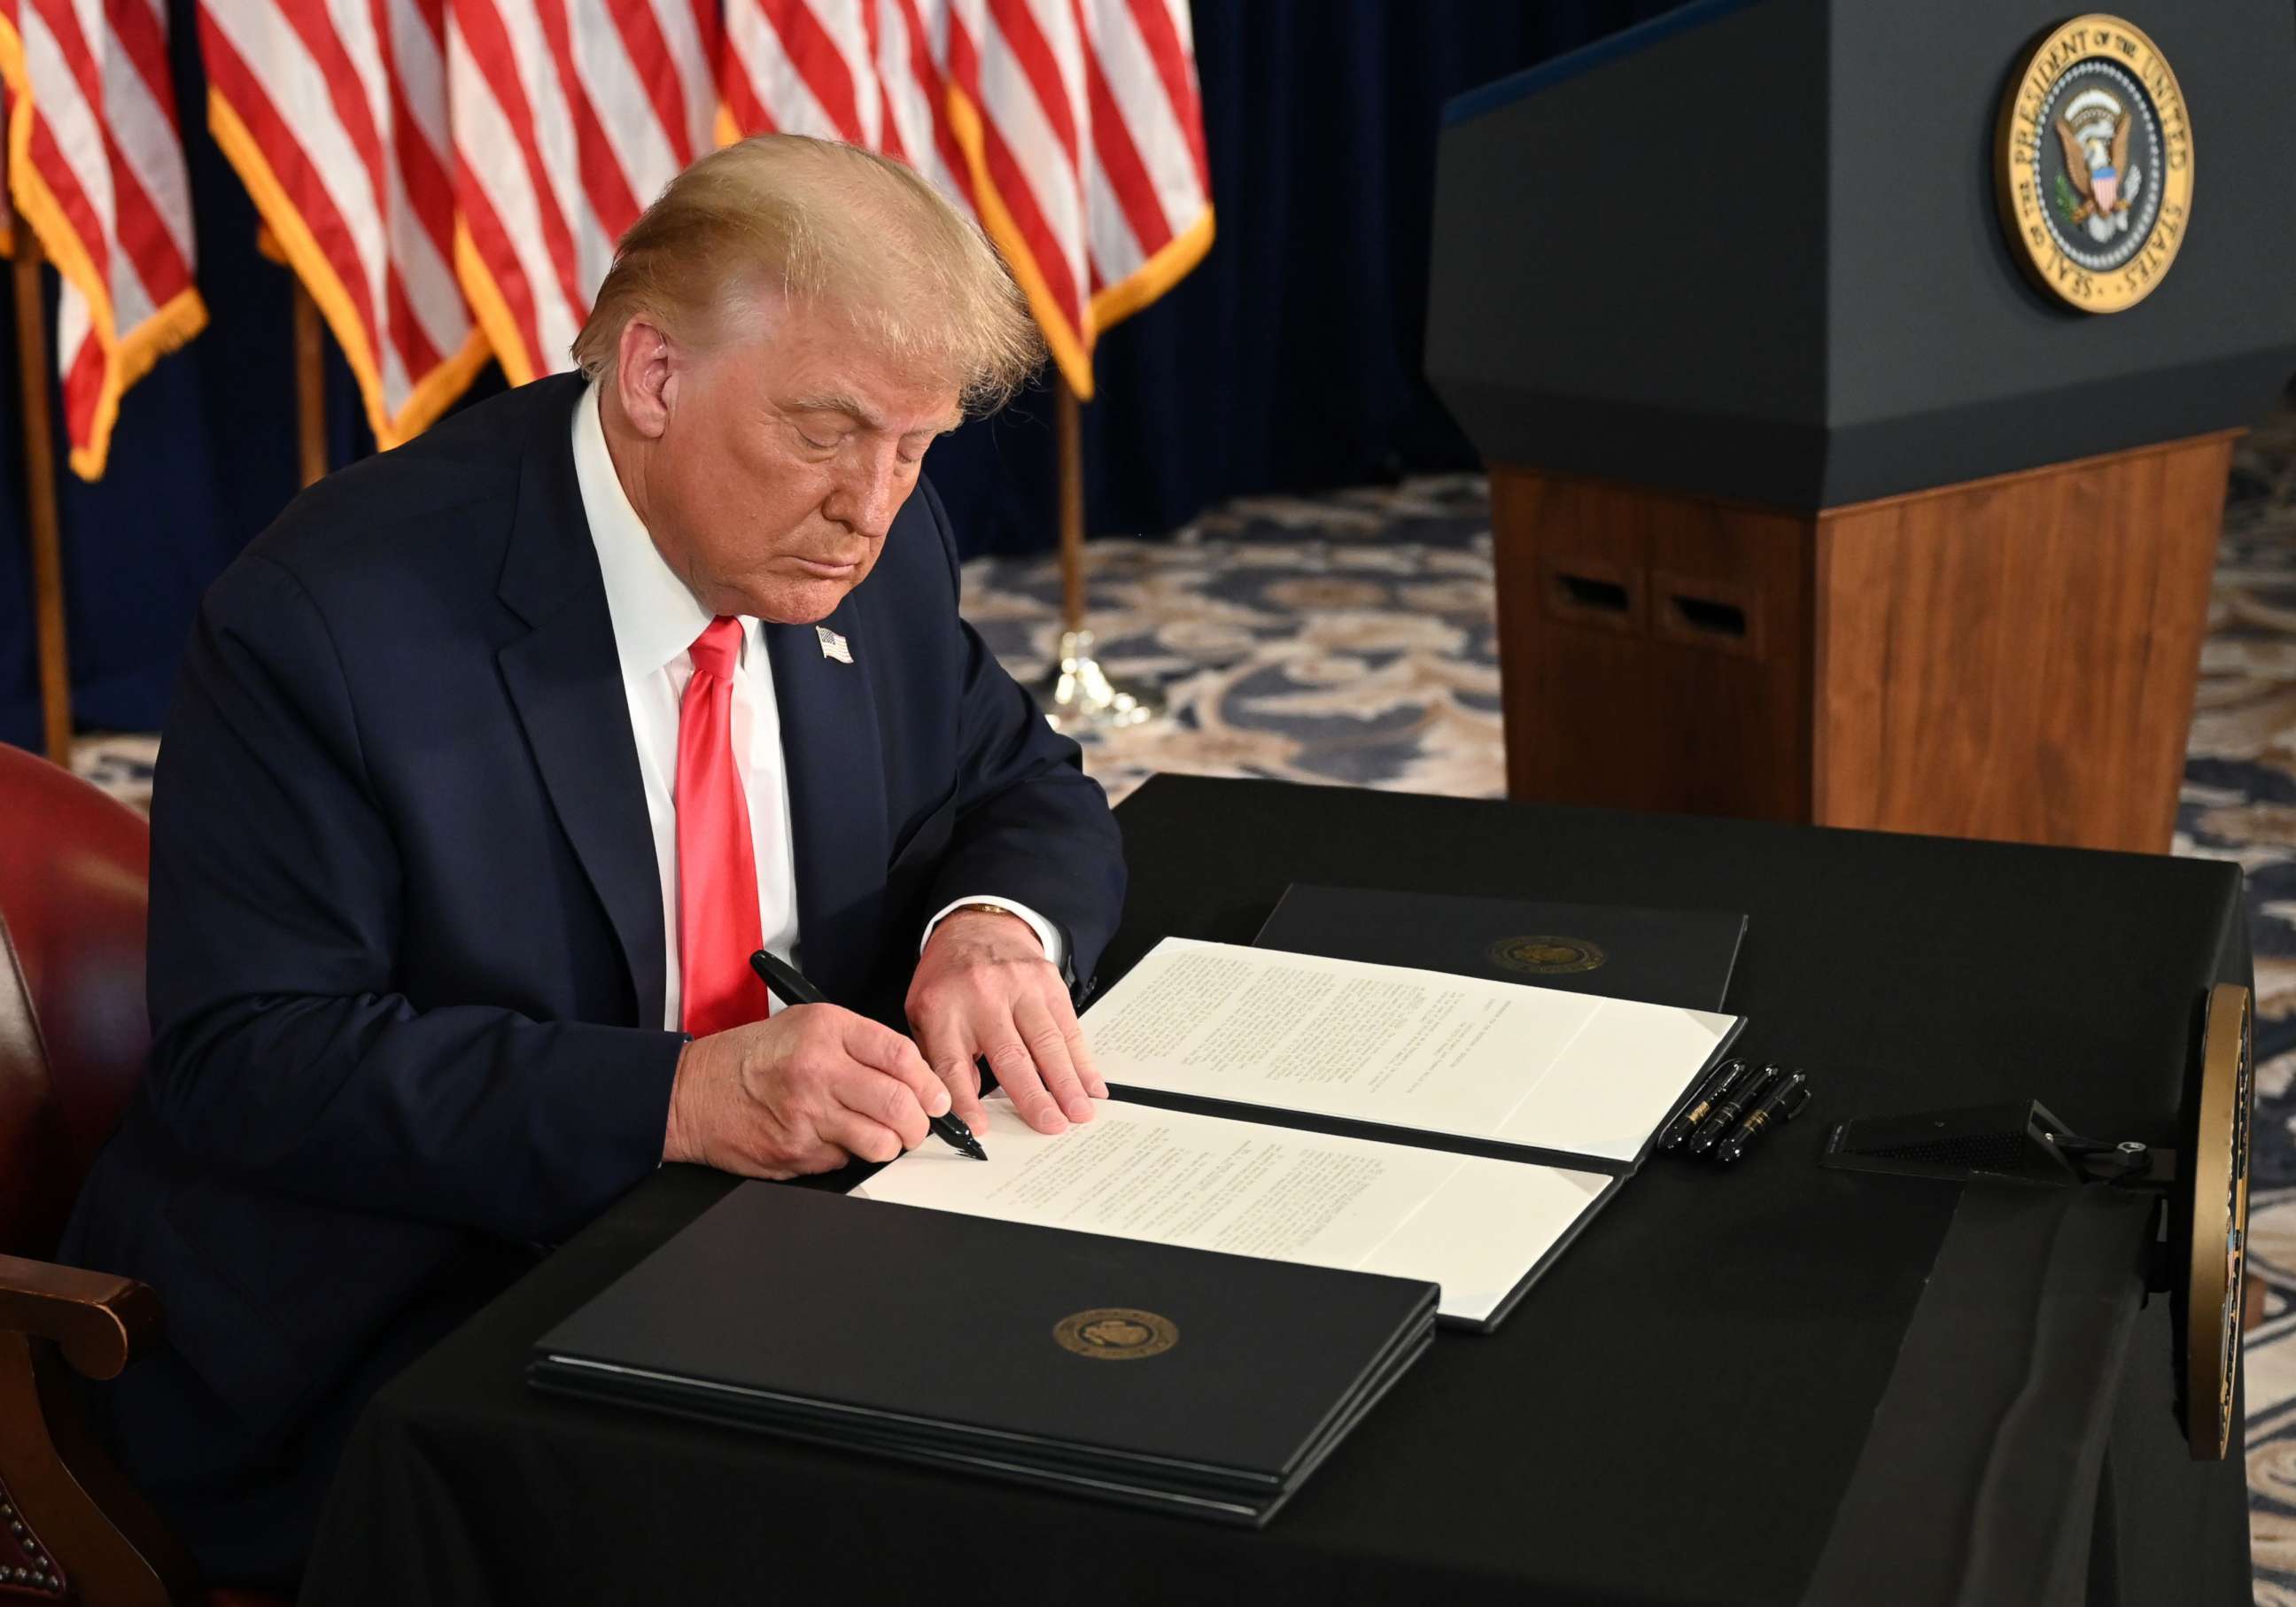 PHOTO: President Donald Trump signs executive orders extending coronavirus economic relief, during a news conference in Bedminster, N.J. on Aug. 8, 2020.